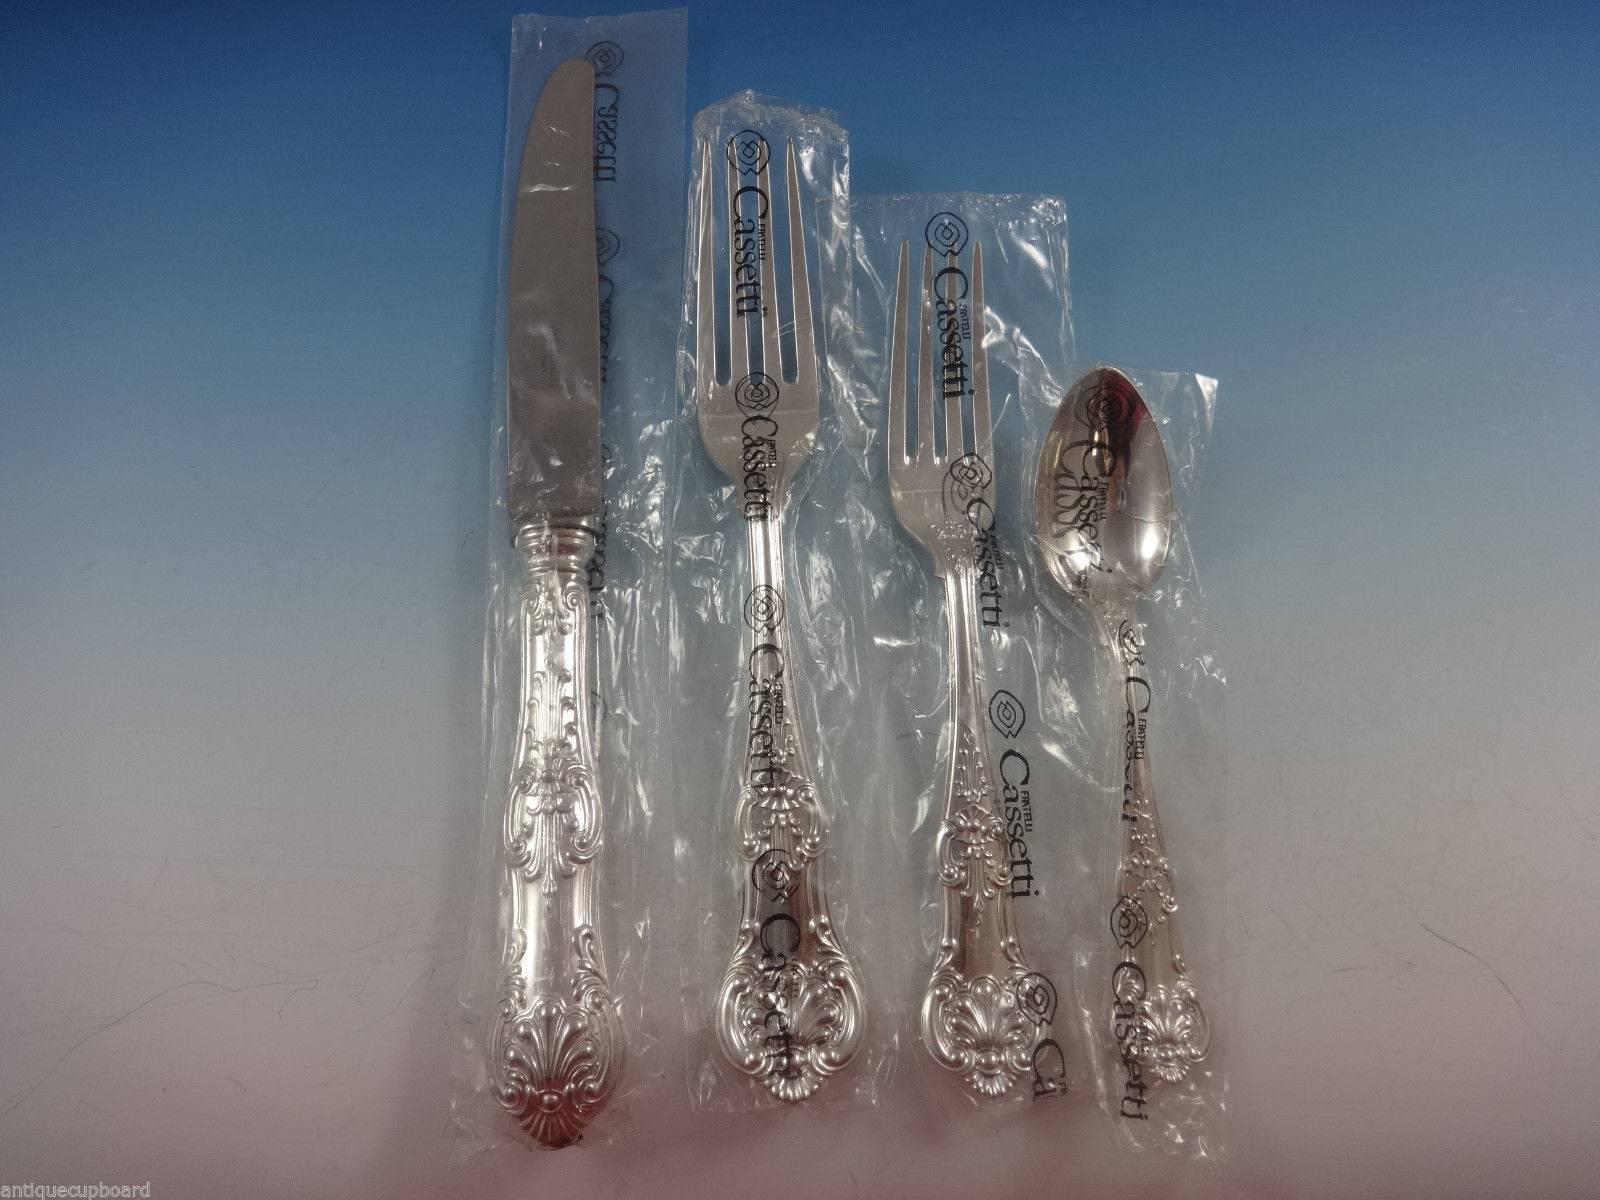 Italian LORENA BY CASSETTI Sterling Silver Dinner Flatware Set 12 SERVICE 66 PIECES NEW